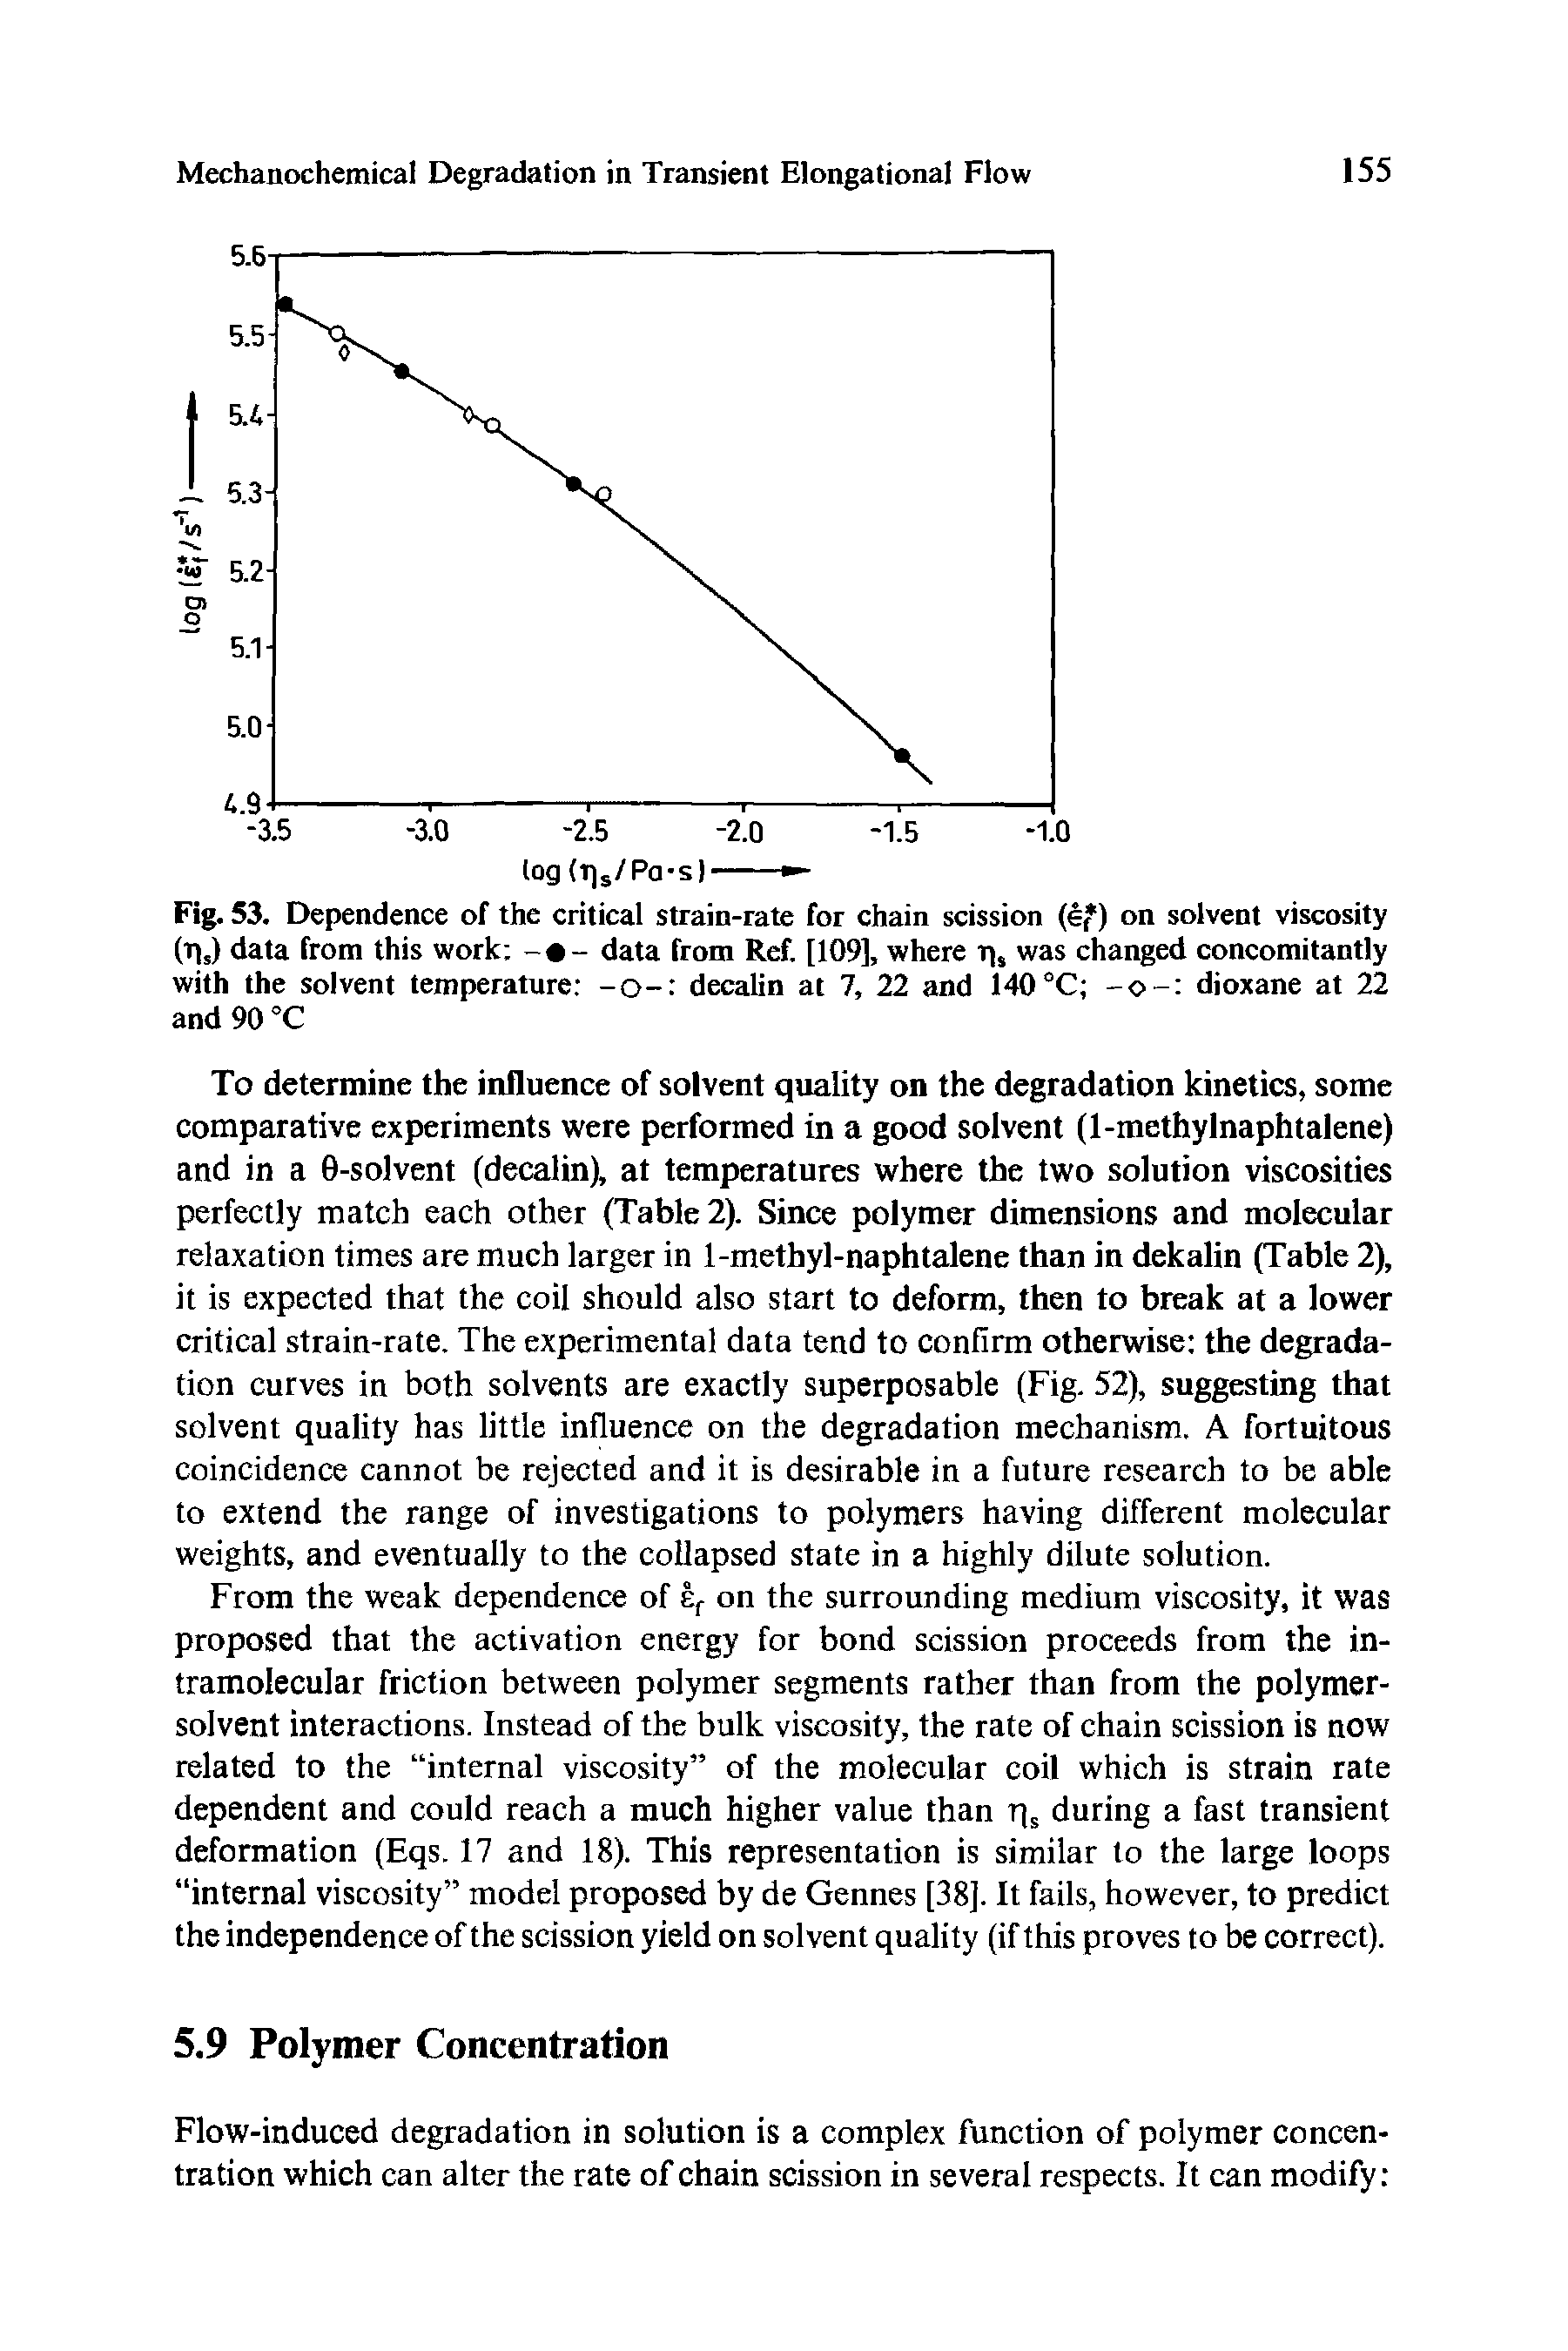 Fig. 53. Dependence of the critical strain-rate for chain scission (e ) on solvent viscosity (T)s) data from this work data from Ref. [109], where T)s was changed concomitantly with the solvent temperature -o- decalin at 7, 22 and 140°C -o- dioxane at 22 and 90 °C...